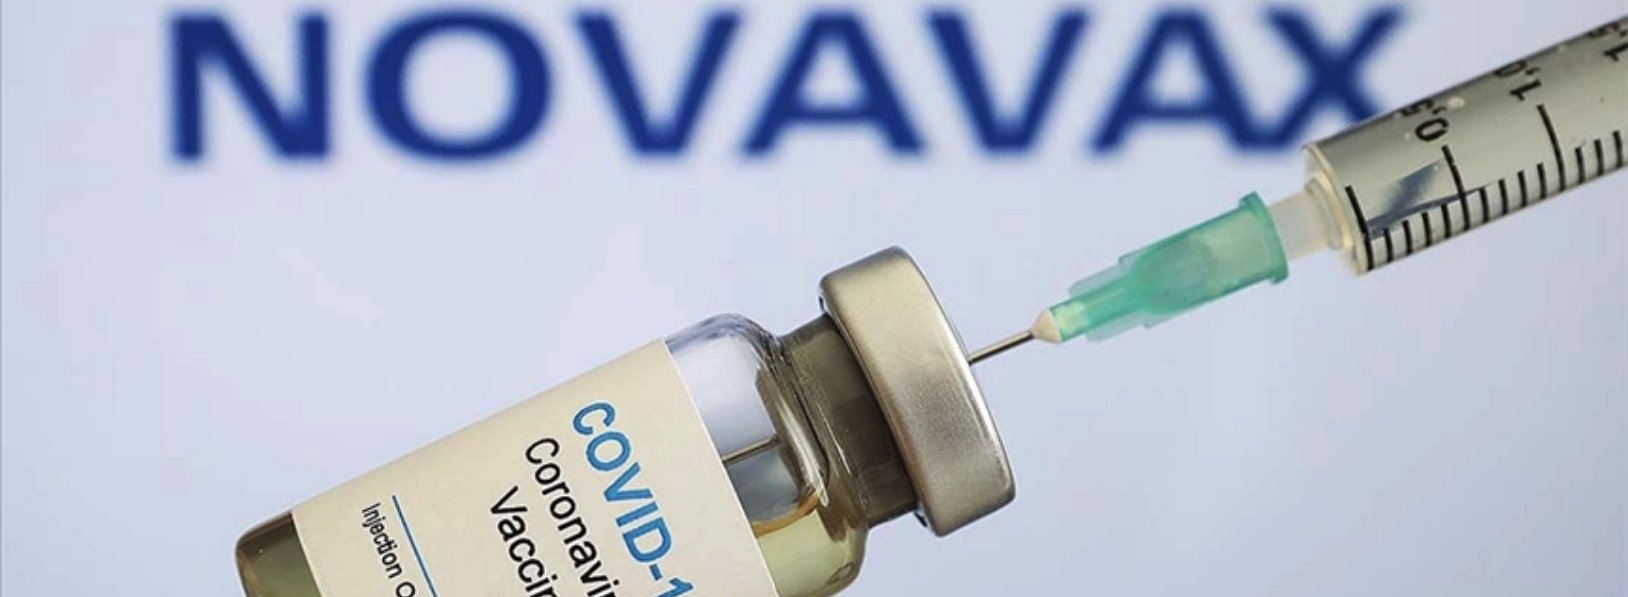 Japanese pharmaceutical company Takeda initiated the clinical trial of the US Novavax Covid-19 vaccine.